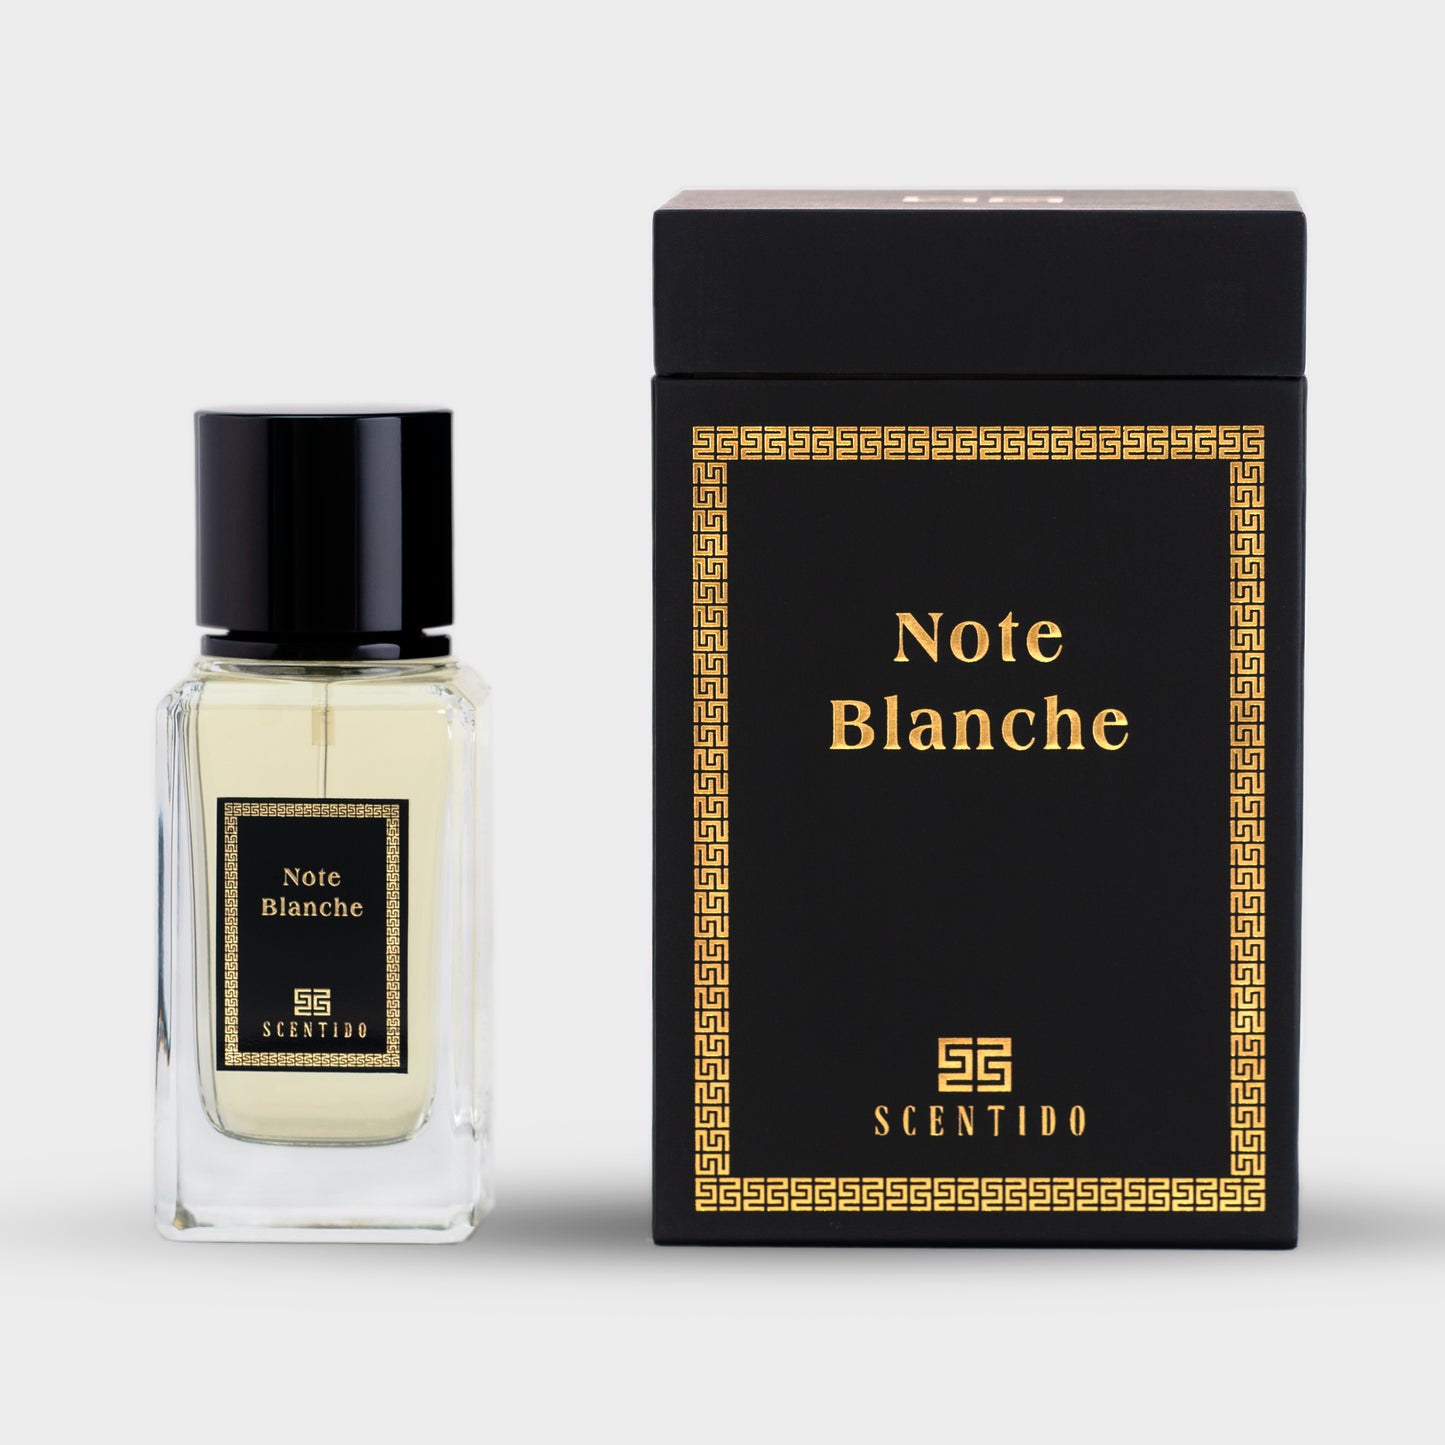 Note Blanche